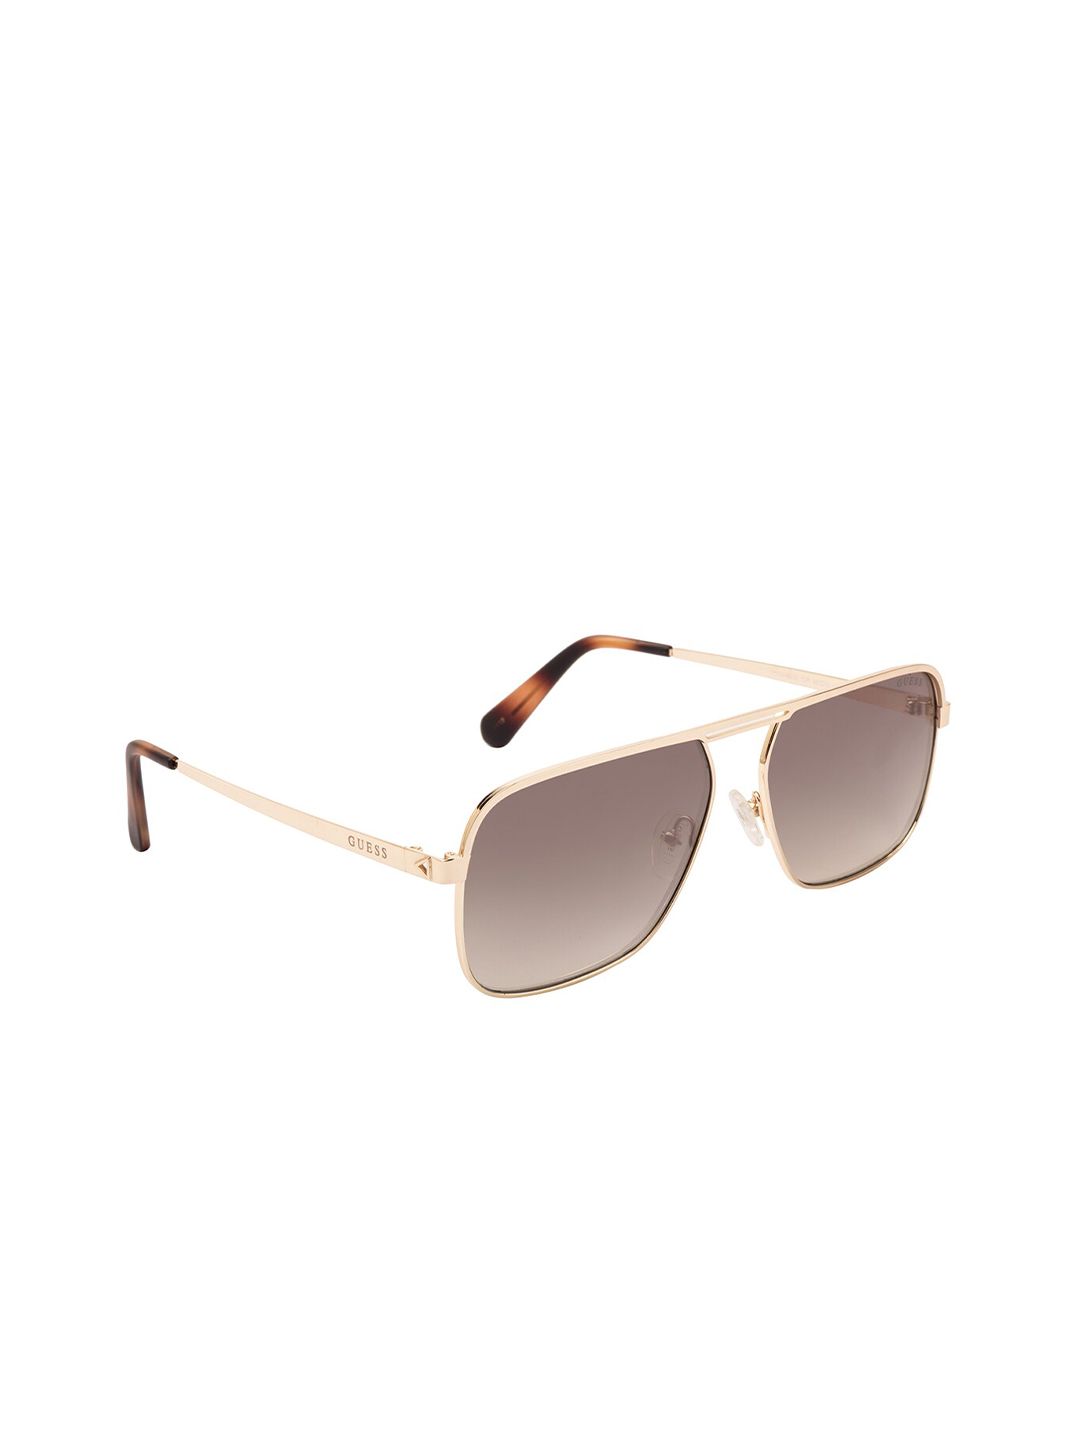 GUESS Unisex Brown Lens & Gold-Toned Rectangle Sunglasses with UV Protected Lens Price in India